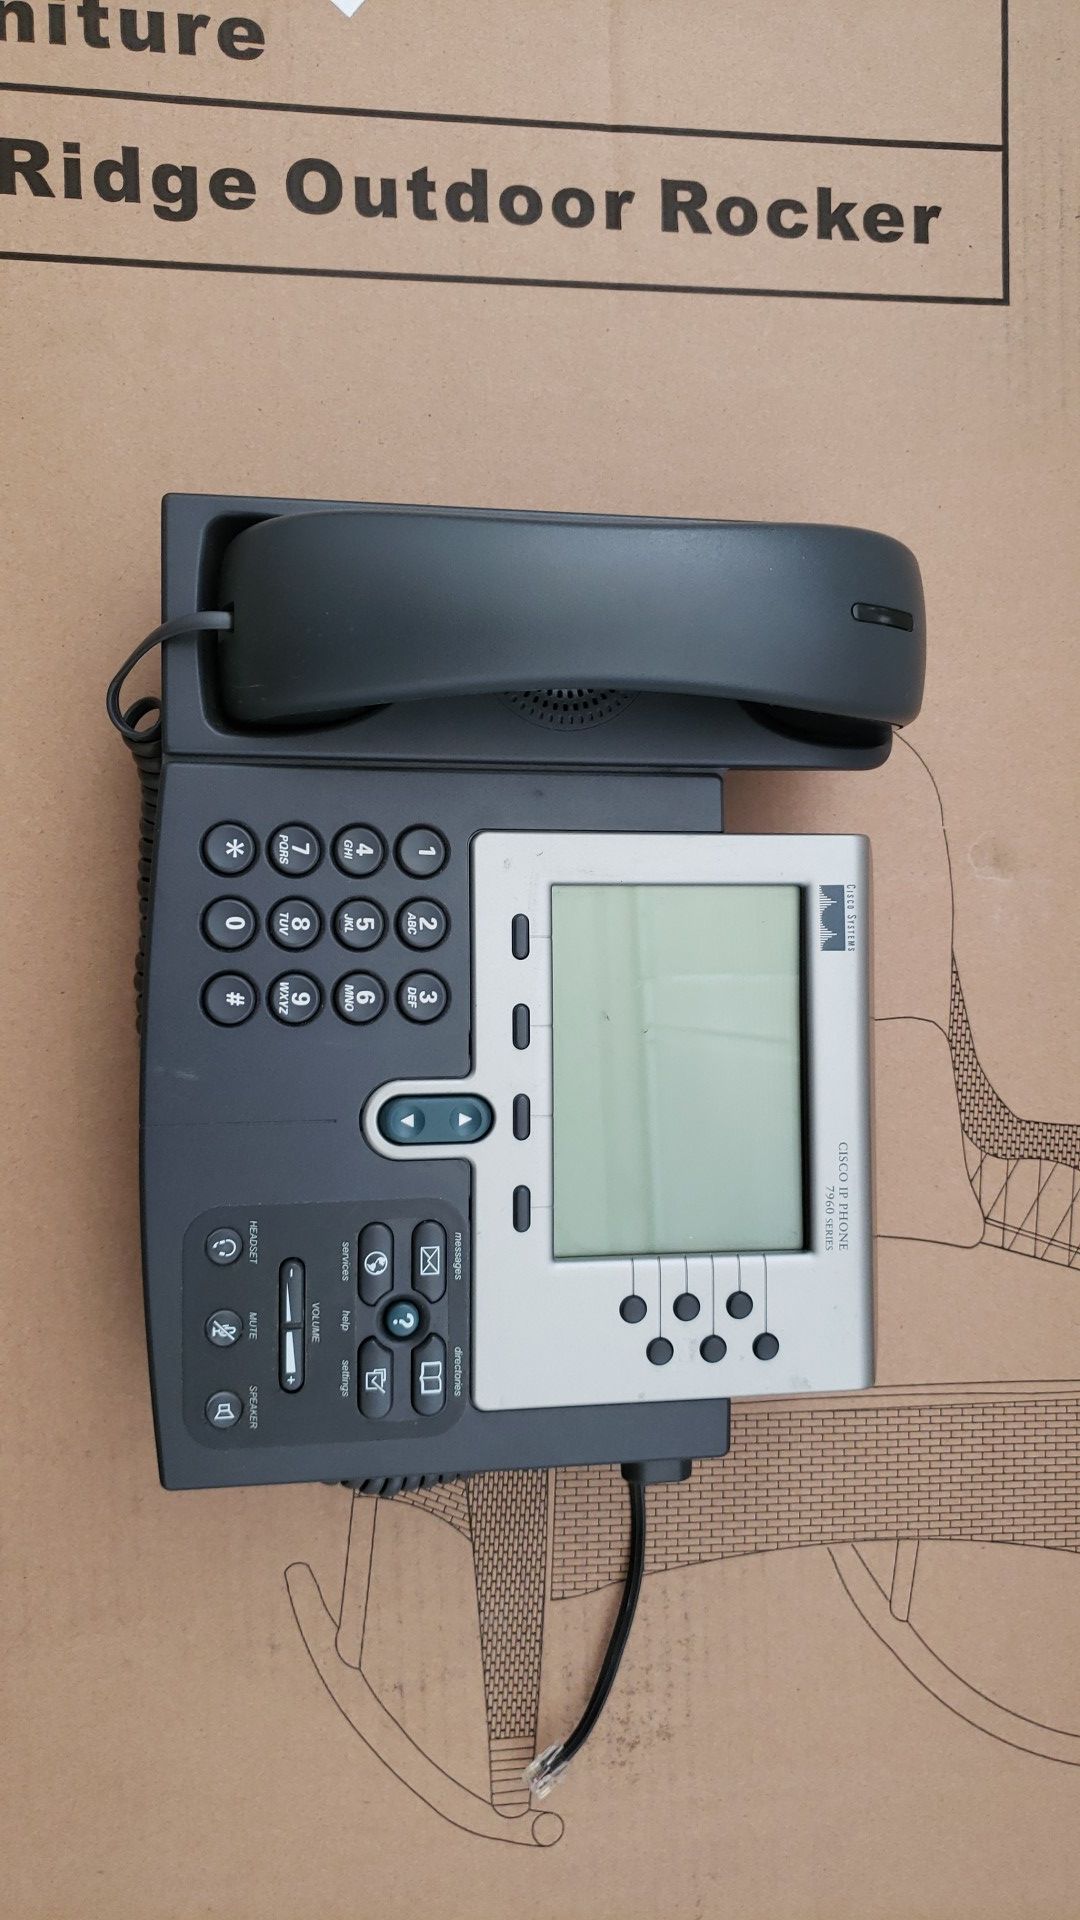 Cisco 7960 Ip Phone - Global The Addition